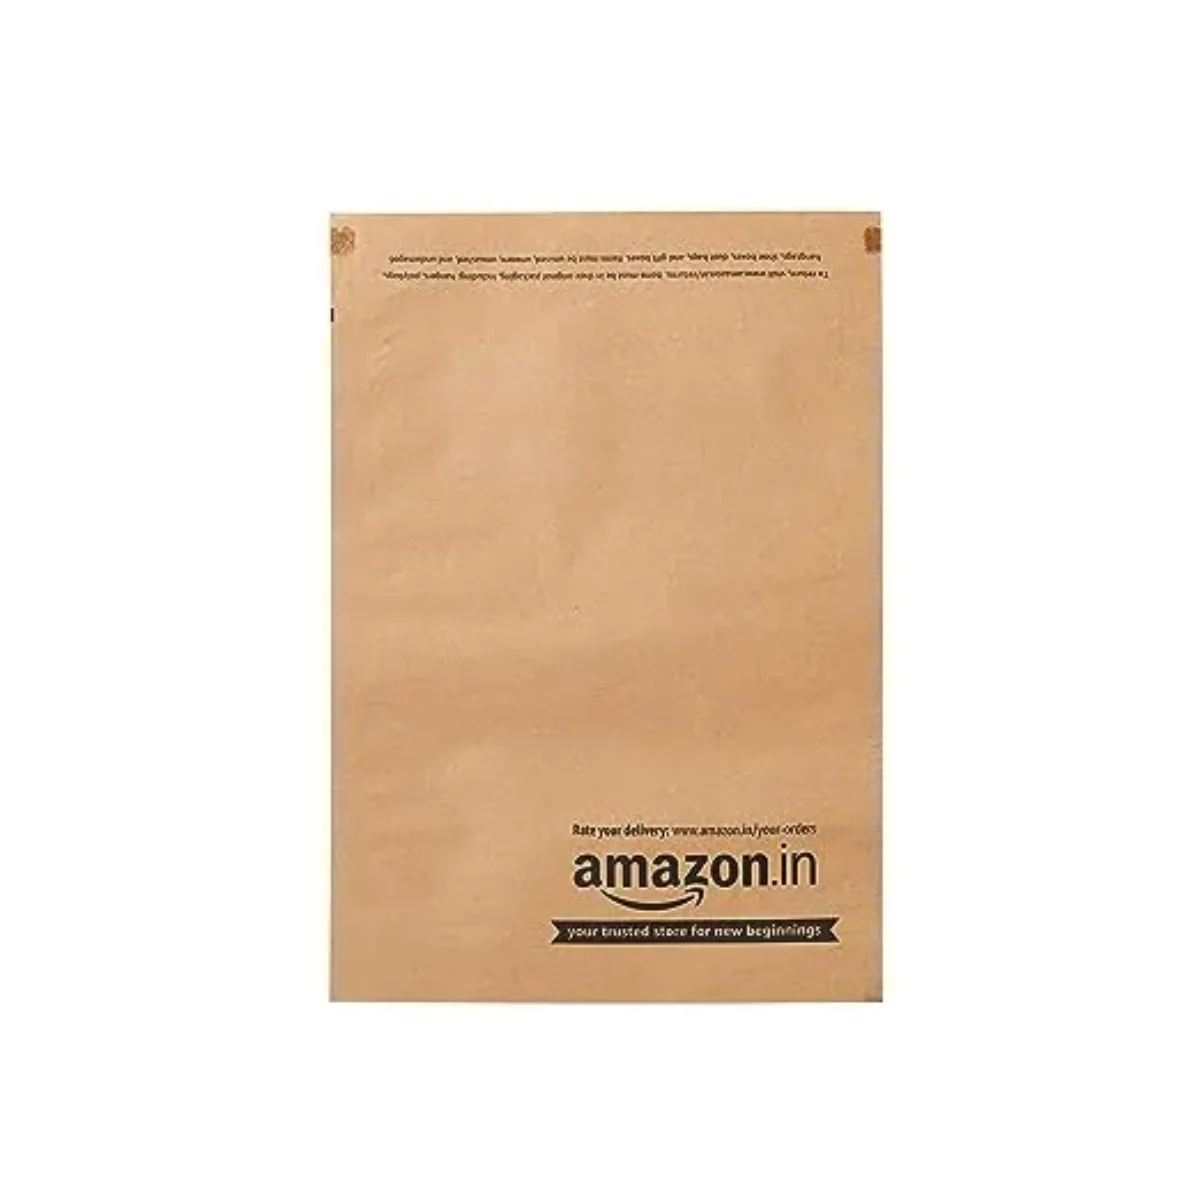 Love Paper Bags - Elegant Red Gift Bags (7x9x3 inch) for Return Gifts,  Birthdays, Valentine's, and Anniversaries - Small and Stylish (5-Pack) :  Amazon.in: Home & Kitchen